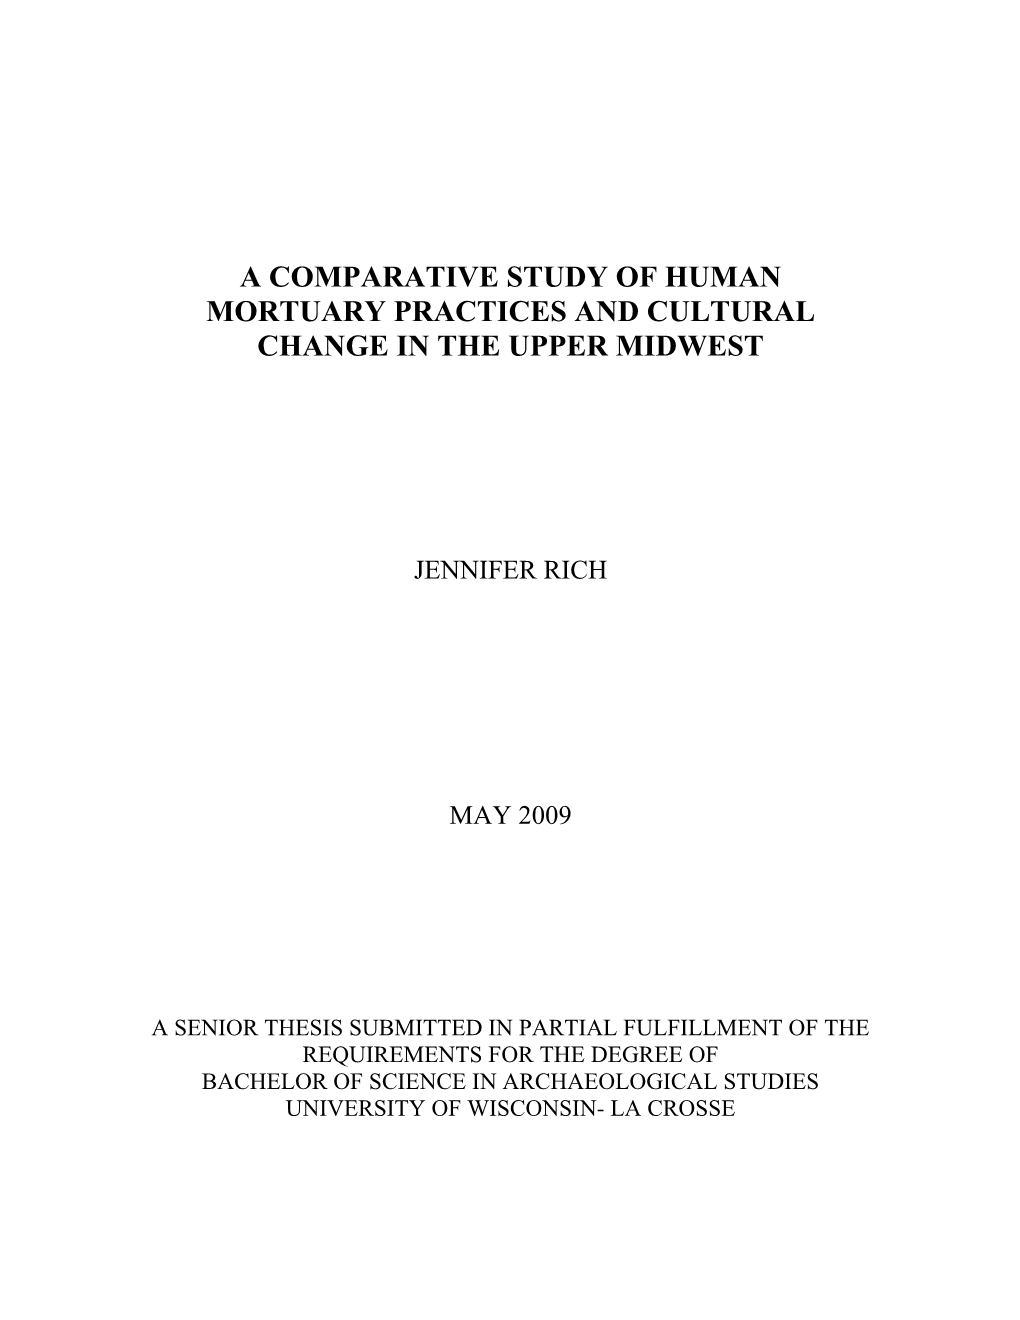 A Comparative Study of Human Mortuary Practices and Cultural Change in the Upper Midwest